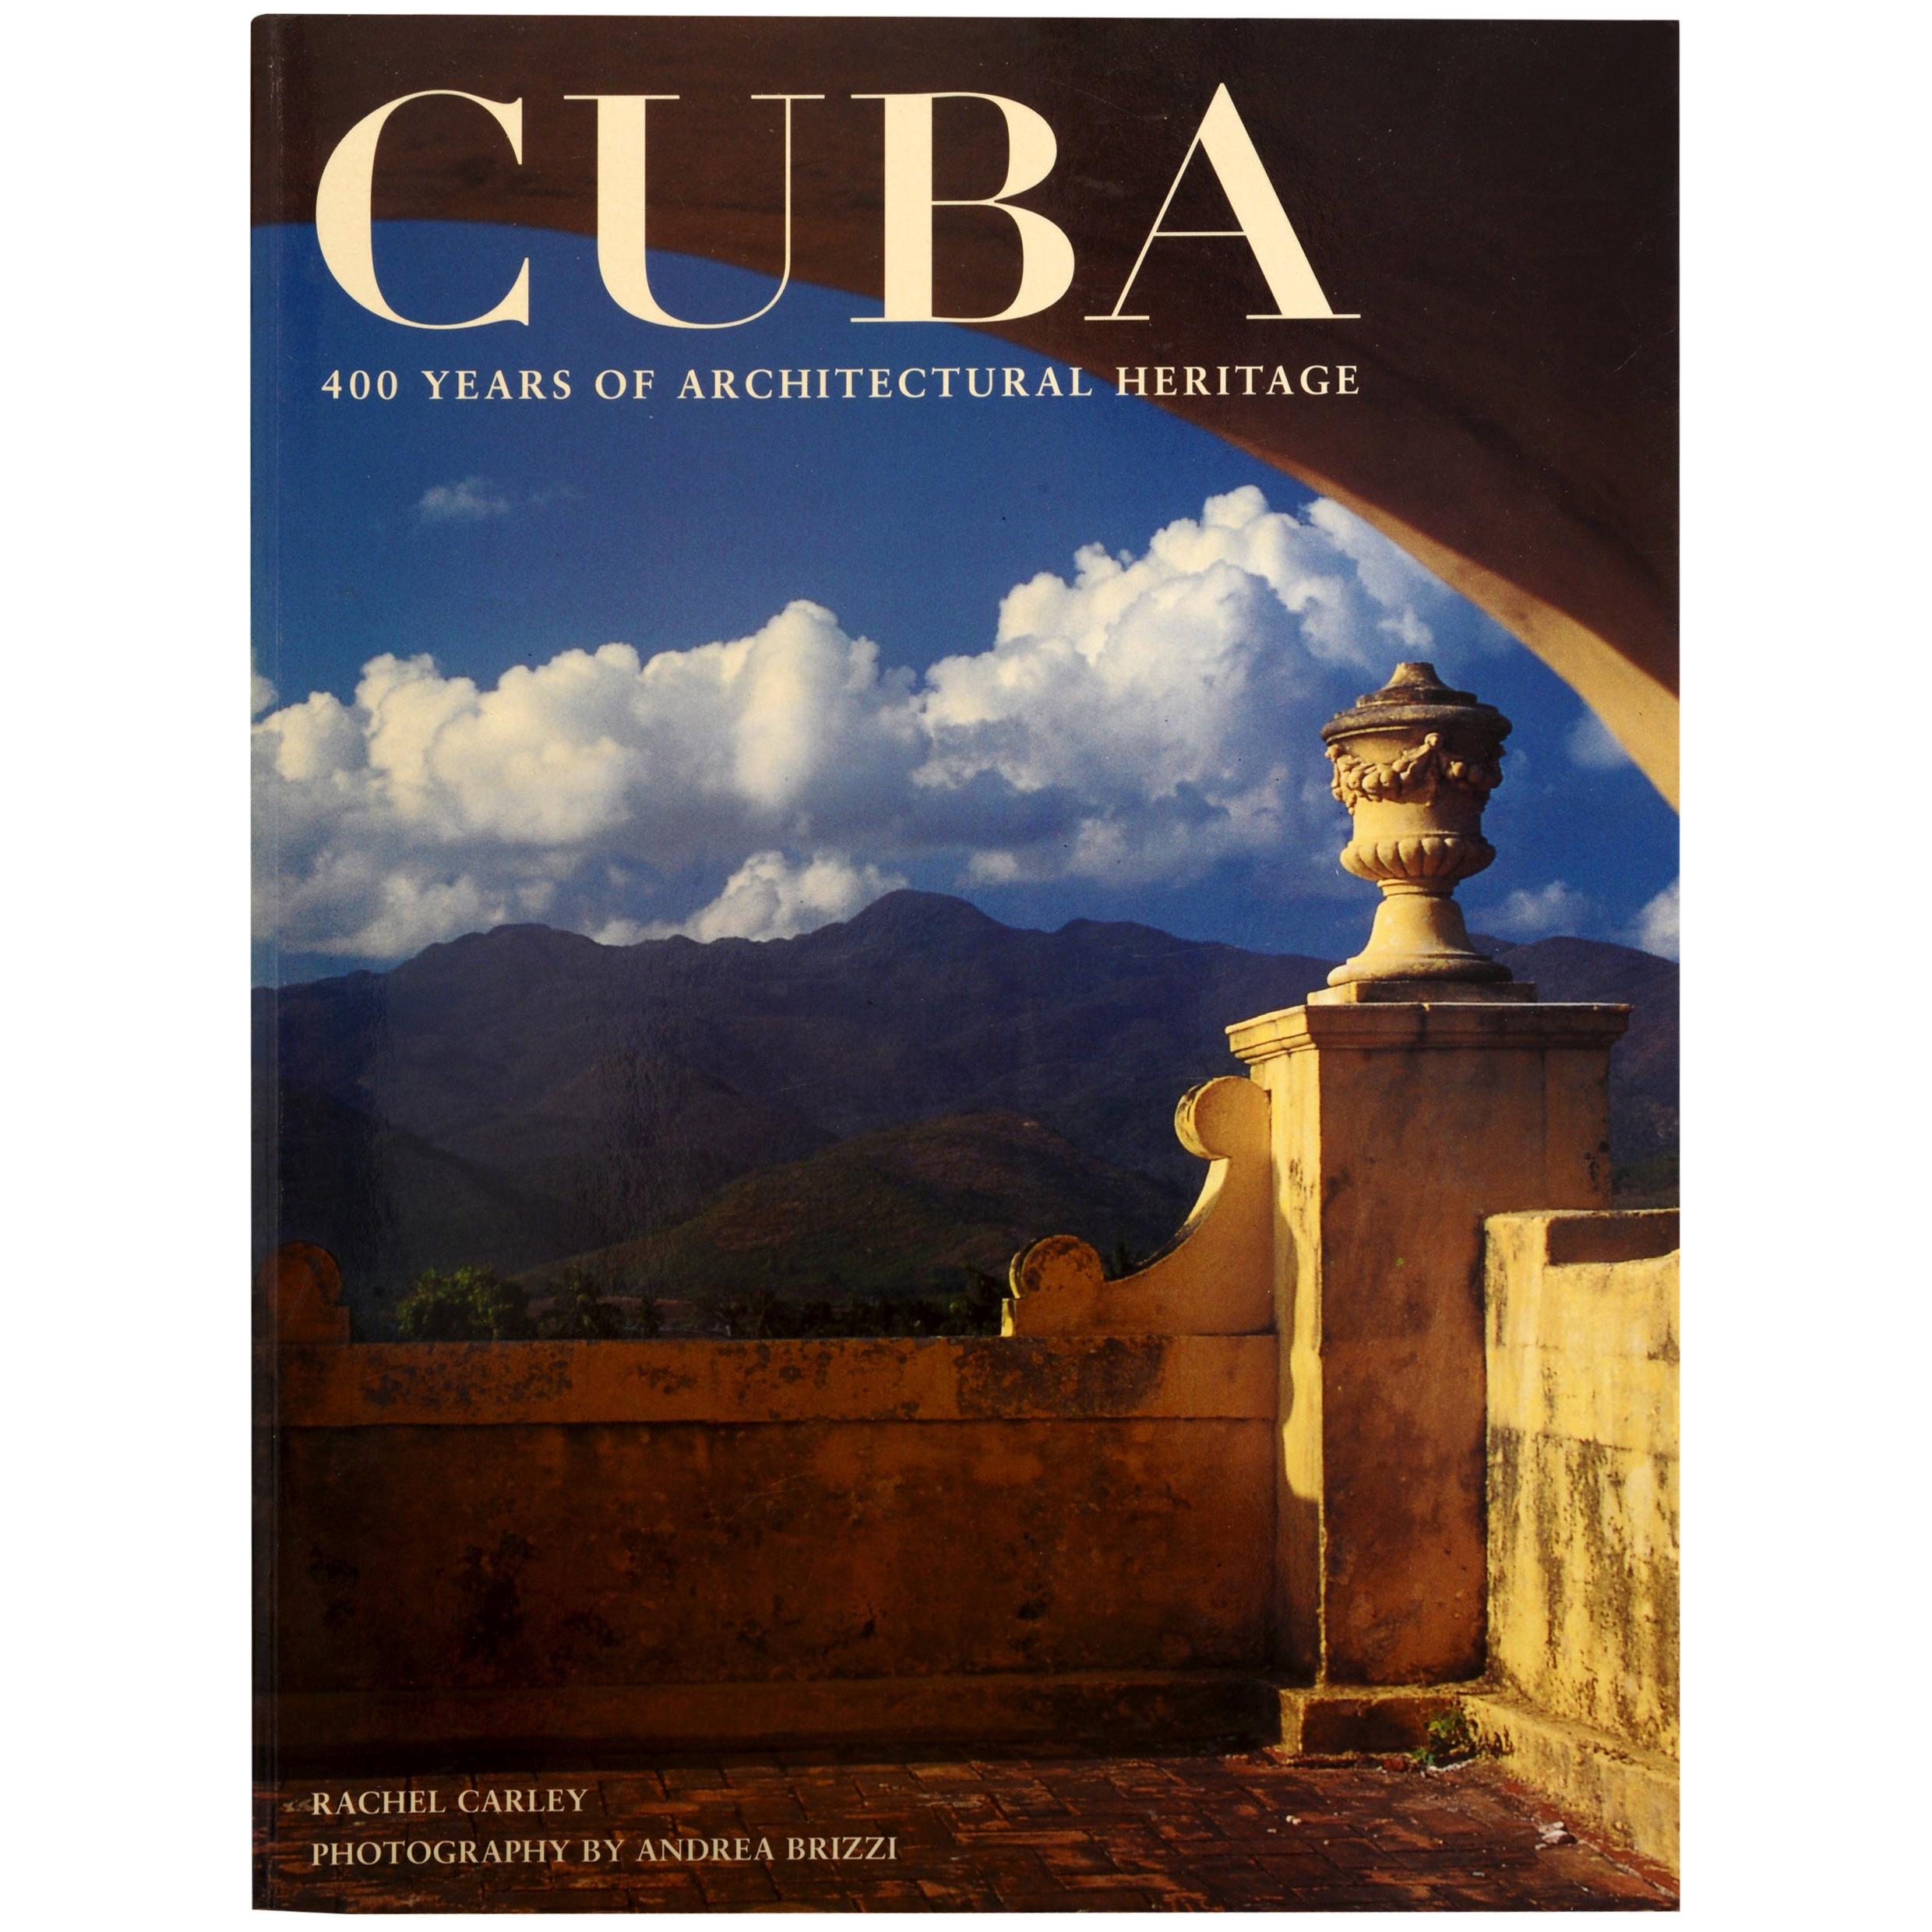 Cuba: 400 Years of Architectural Heritage by Rachel Carley, Stated 1st Printing